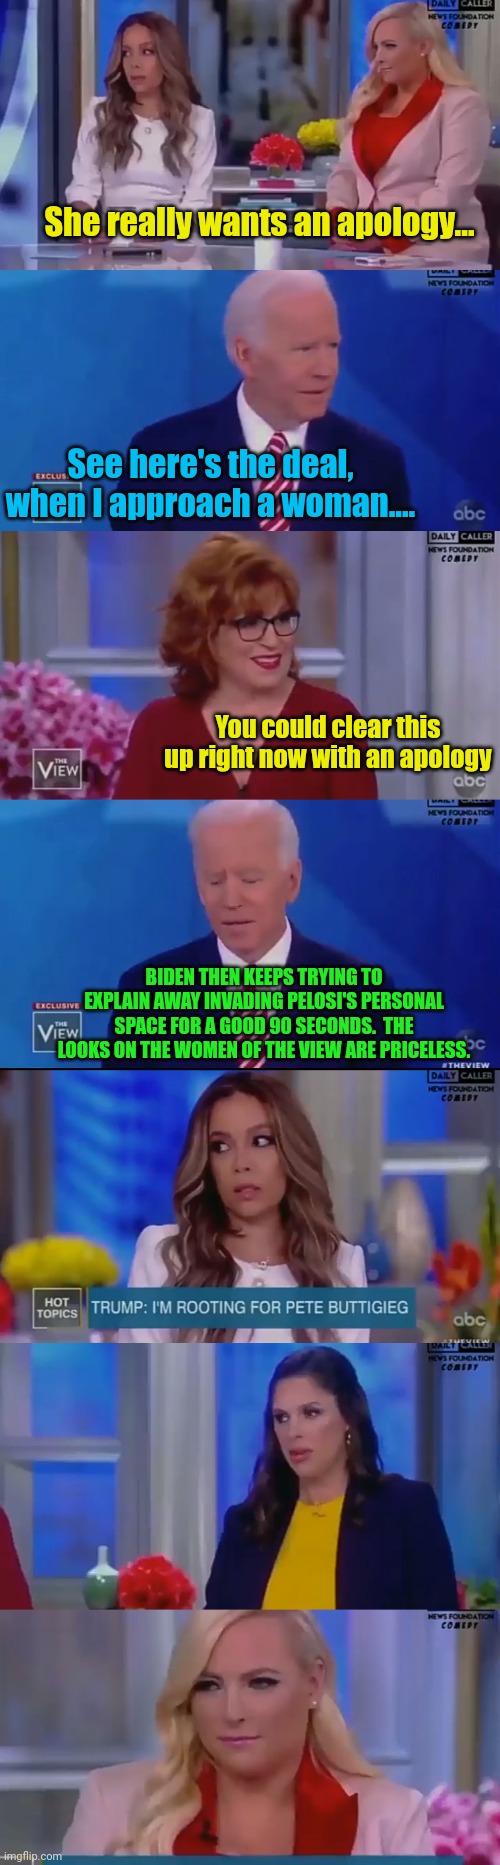 Gee Biden invaded some spaces of women... Imagine that. | She really wants an apology... See here's the deal, when I approach a woman.... You could clear this up right now with an apology; BIDEN THEN KEEPS TRYING TO EXPLAIN AWAY INVADING PELOSI'S PERSONAL SPACE FOR A GOOD 90 SECONDS.  THE LOOKS ON THE WOMEN OF THE VIEW ARE PRICELESS. | image tagged in the view,creepy joe biden | made w/ Imgflip meme maker